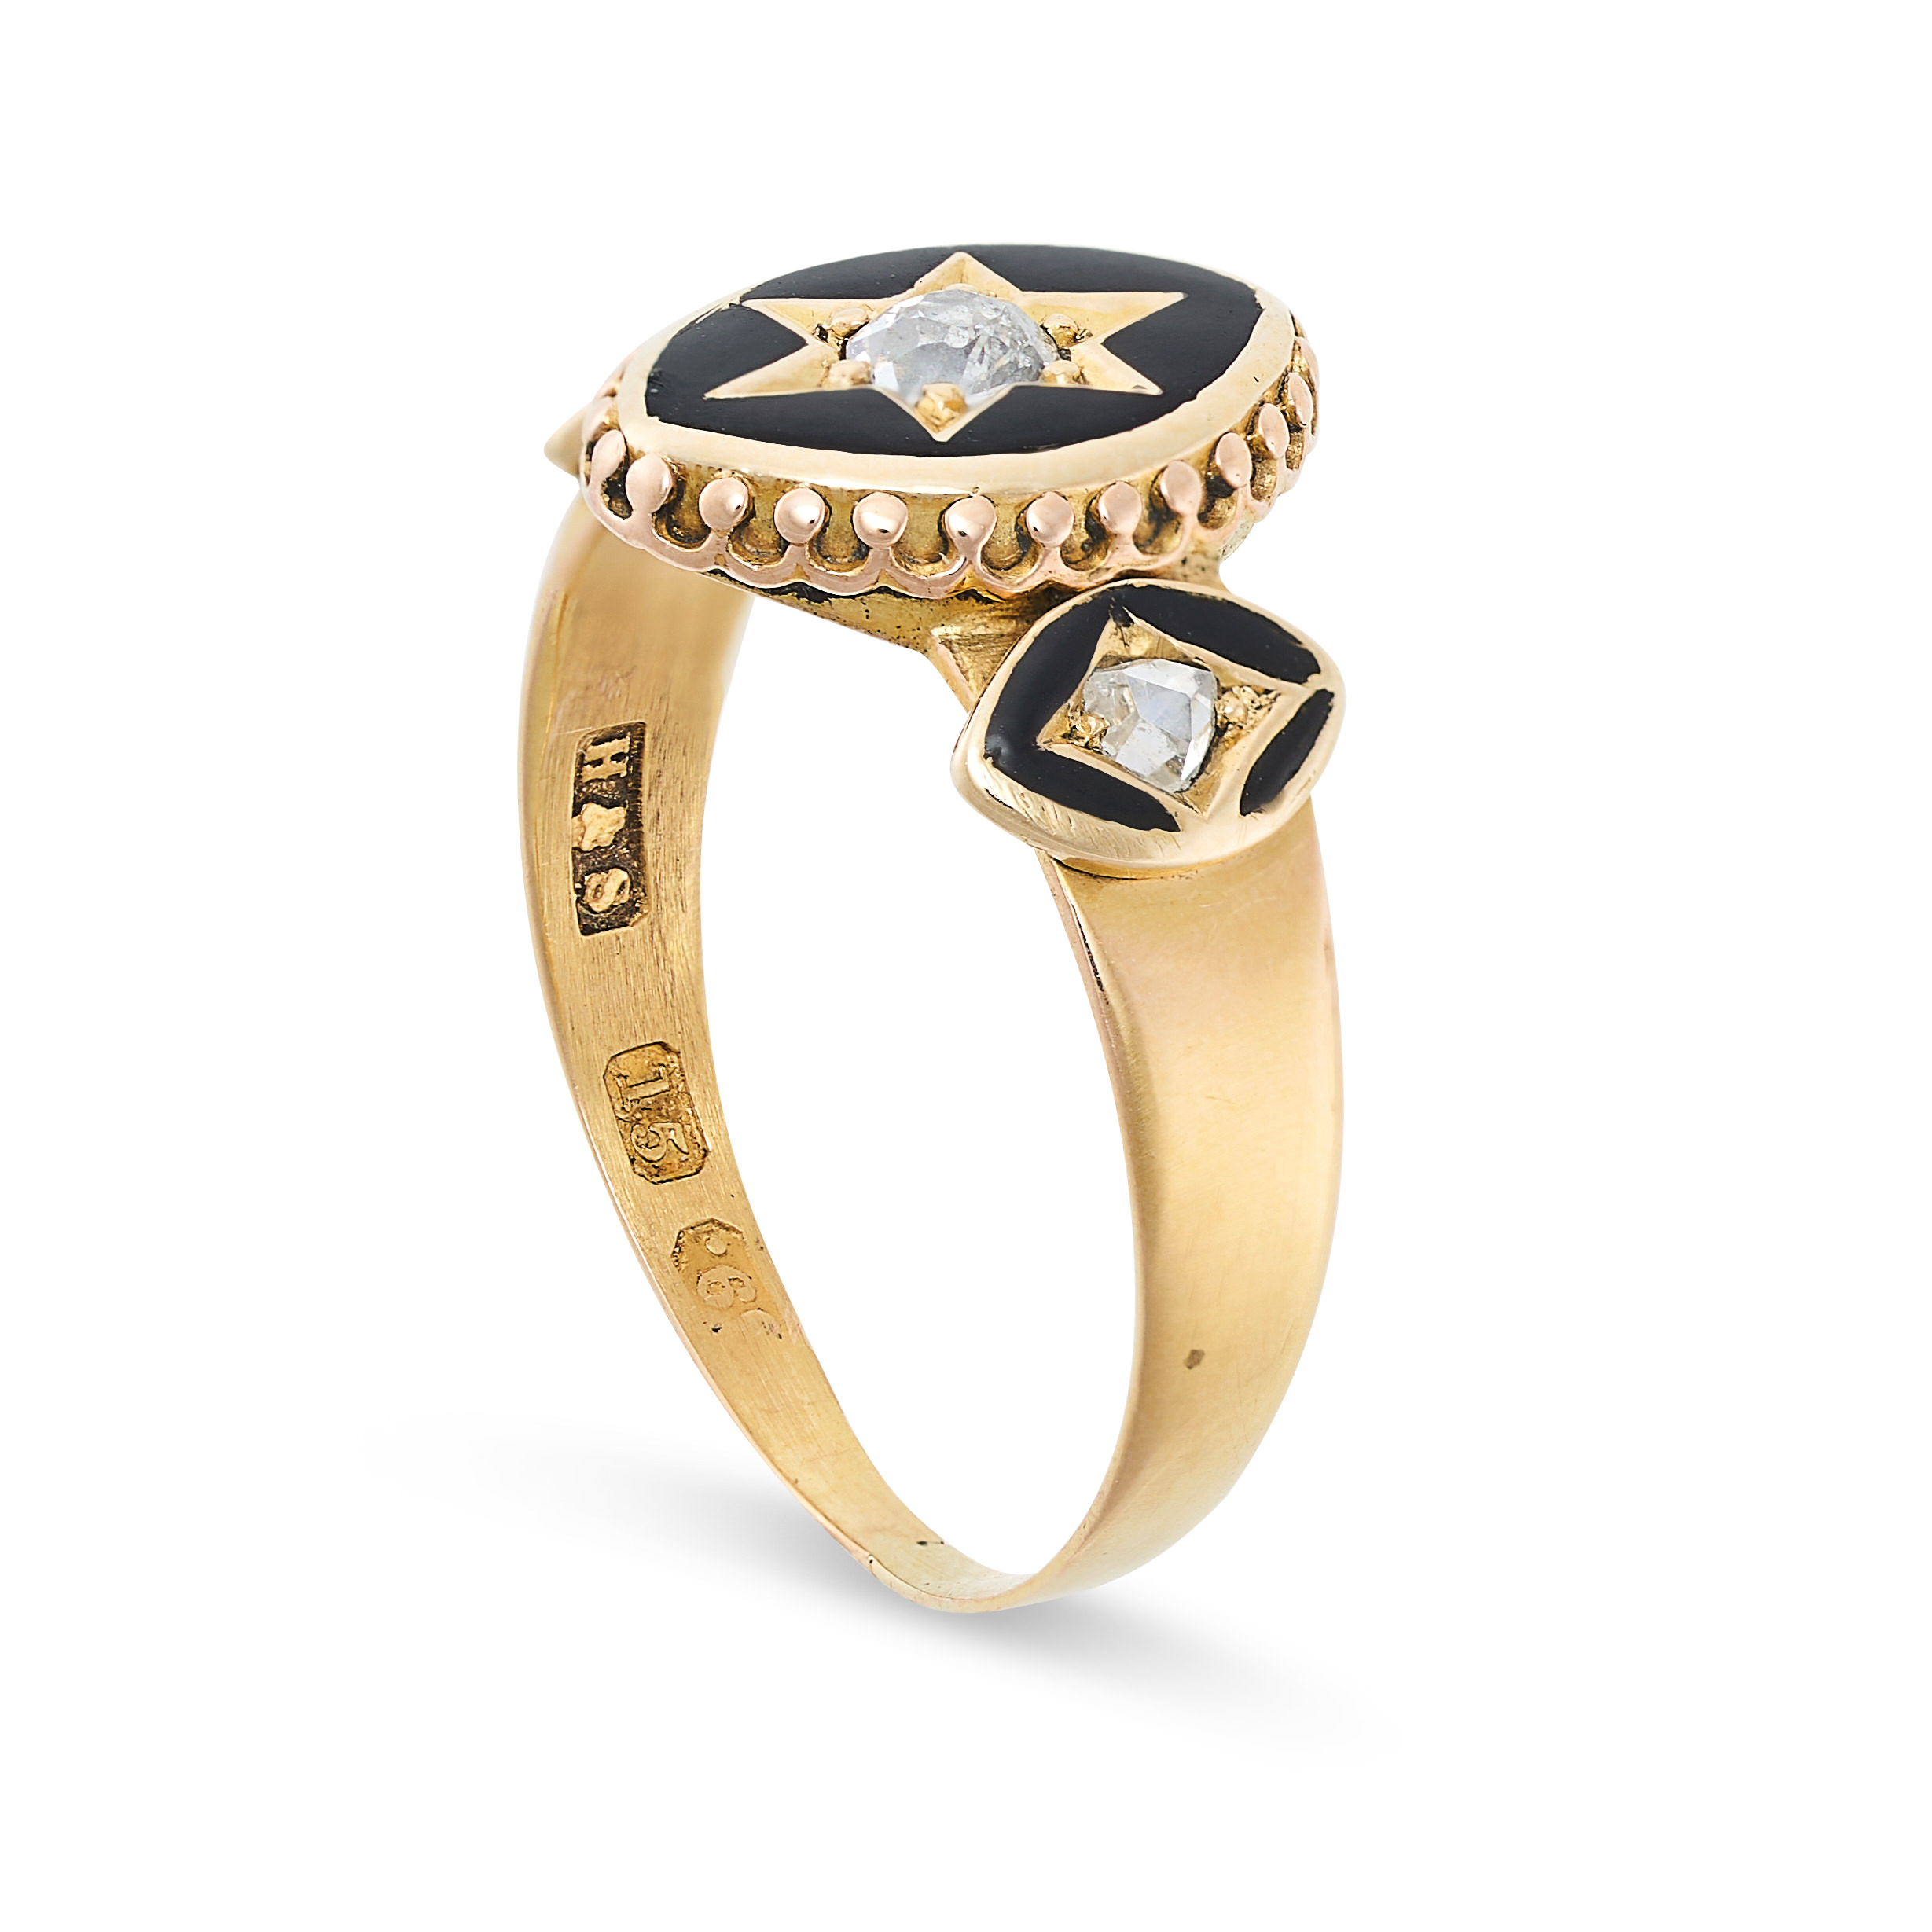 AN ANTIQUE DIAMOND AND ENAMEL RING in 15ct yellow gold, the oval face with central star motif set - Image 2 of 2